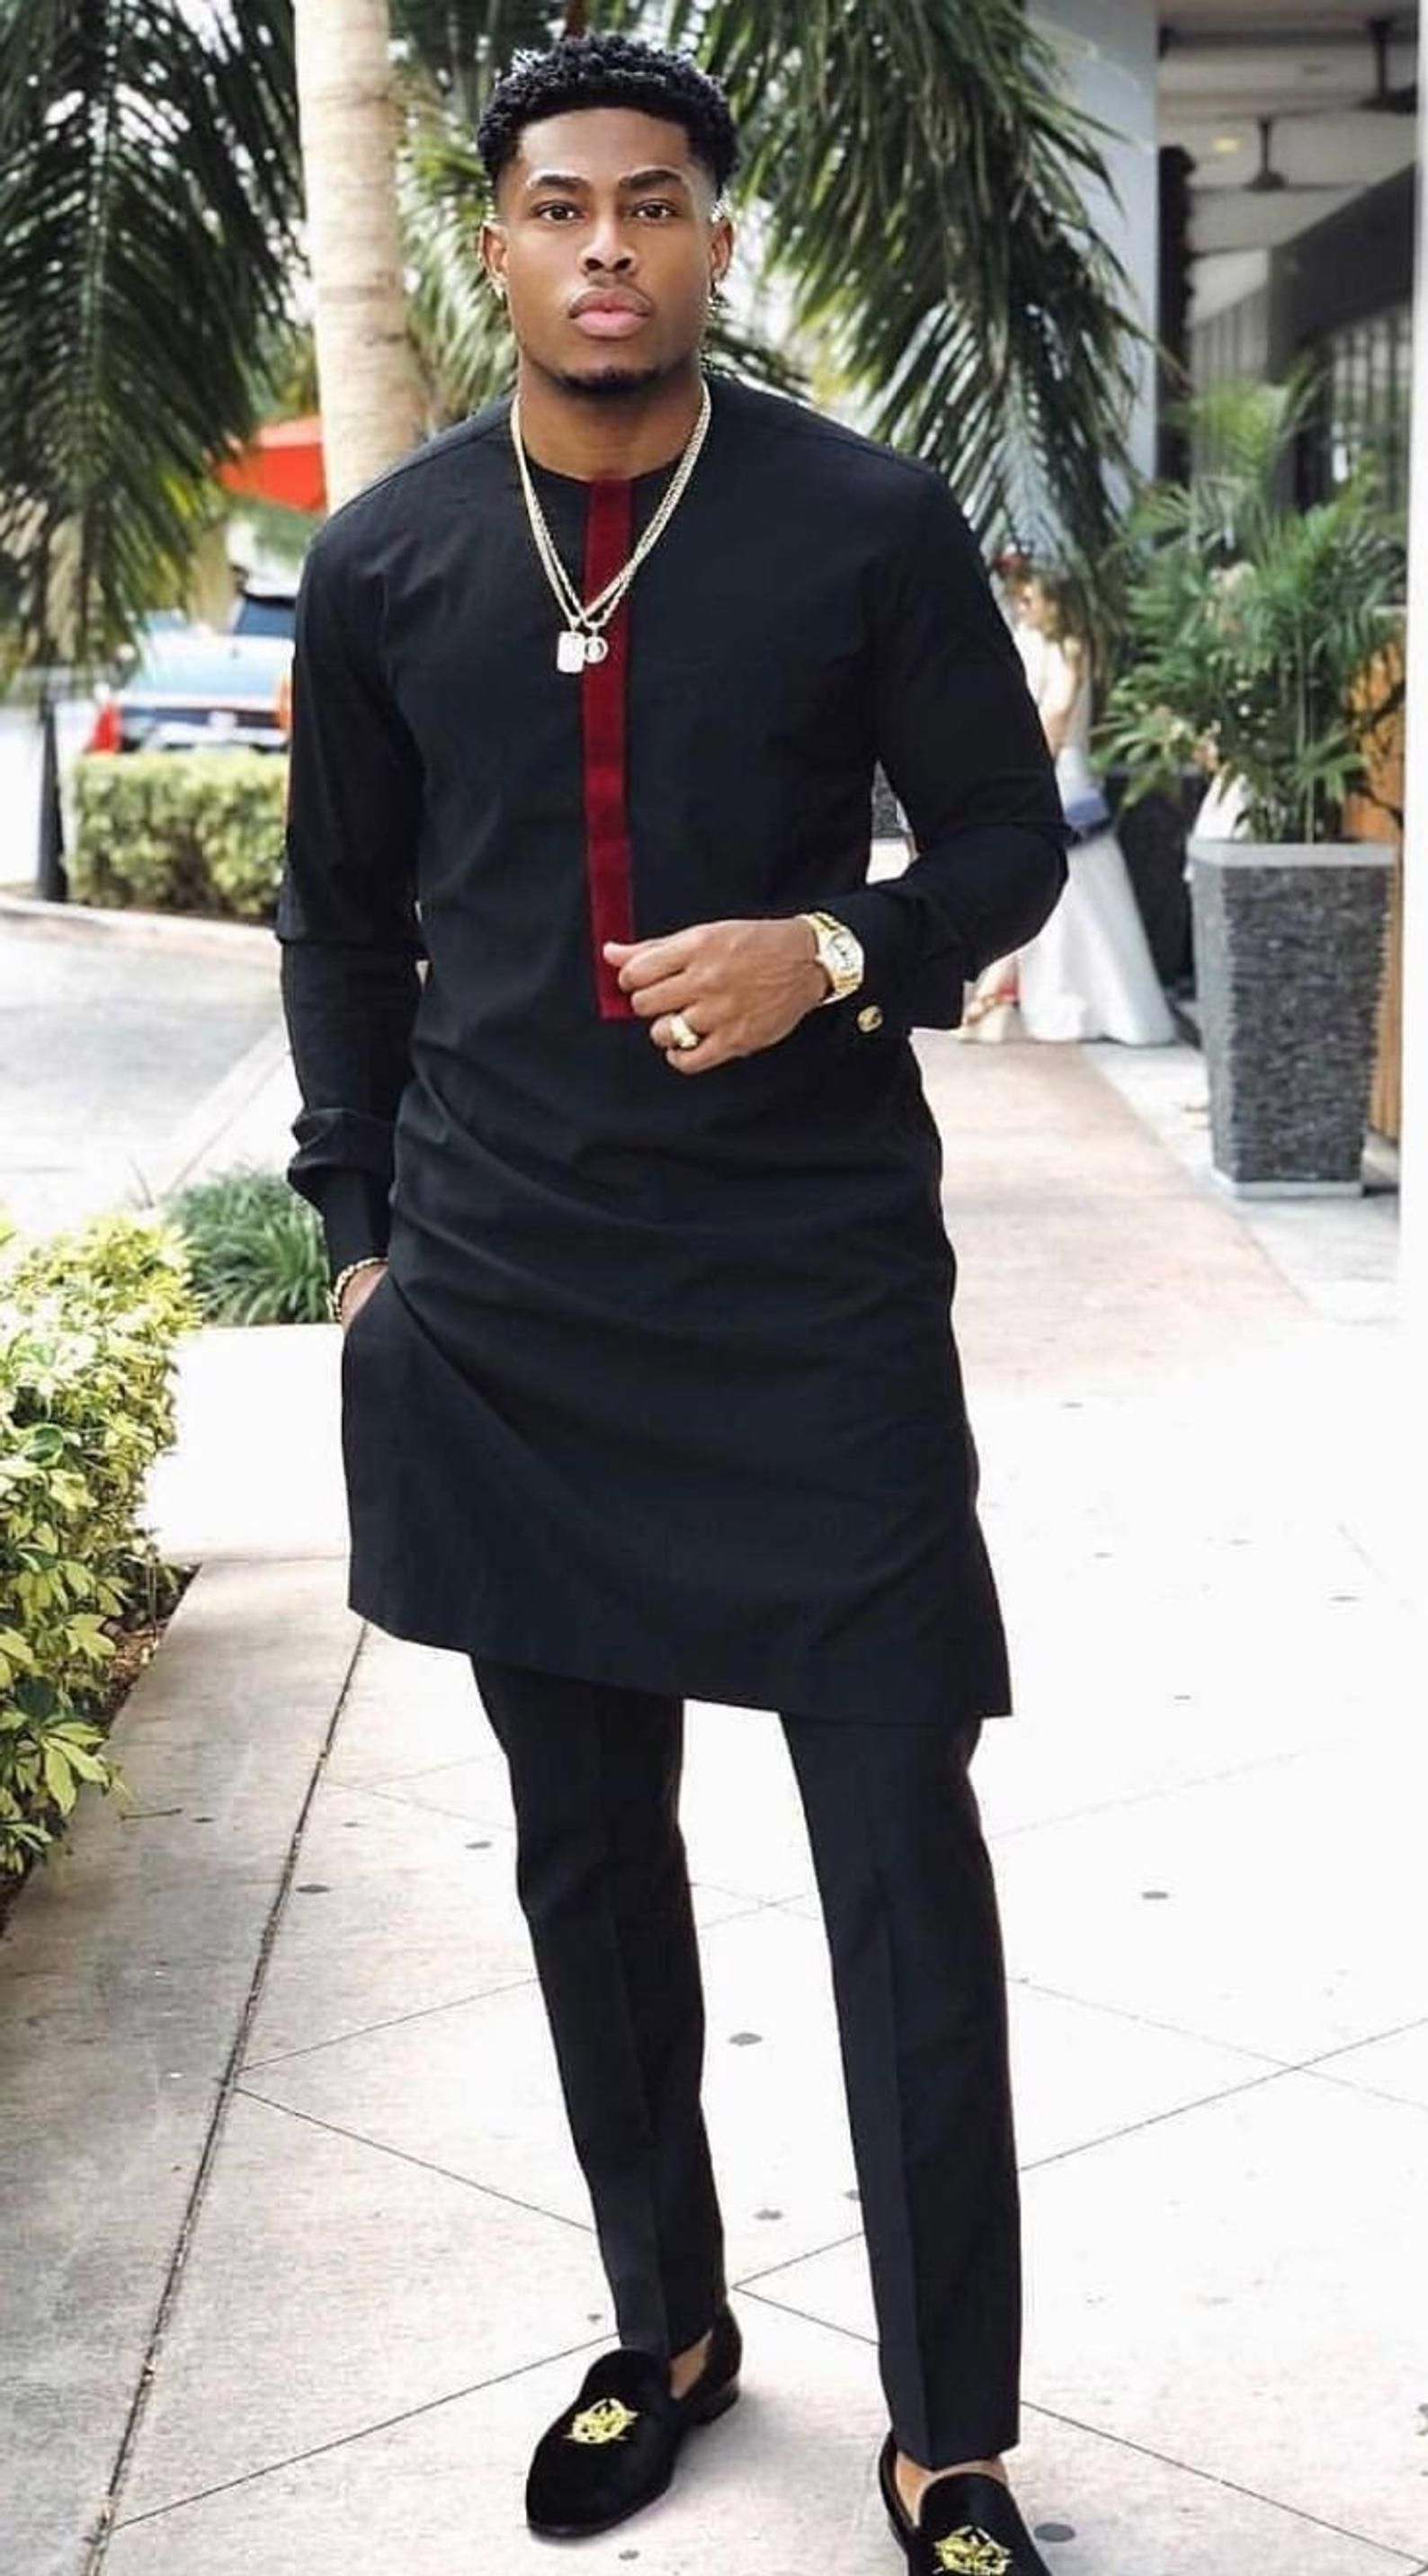 African Men clothing, African Dashiki, African grooms men, African Men Wedding, African Wedding, African Print for Men, Black African Suit -   14 fitness Aesthetic men ideas